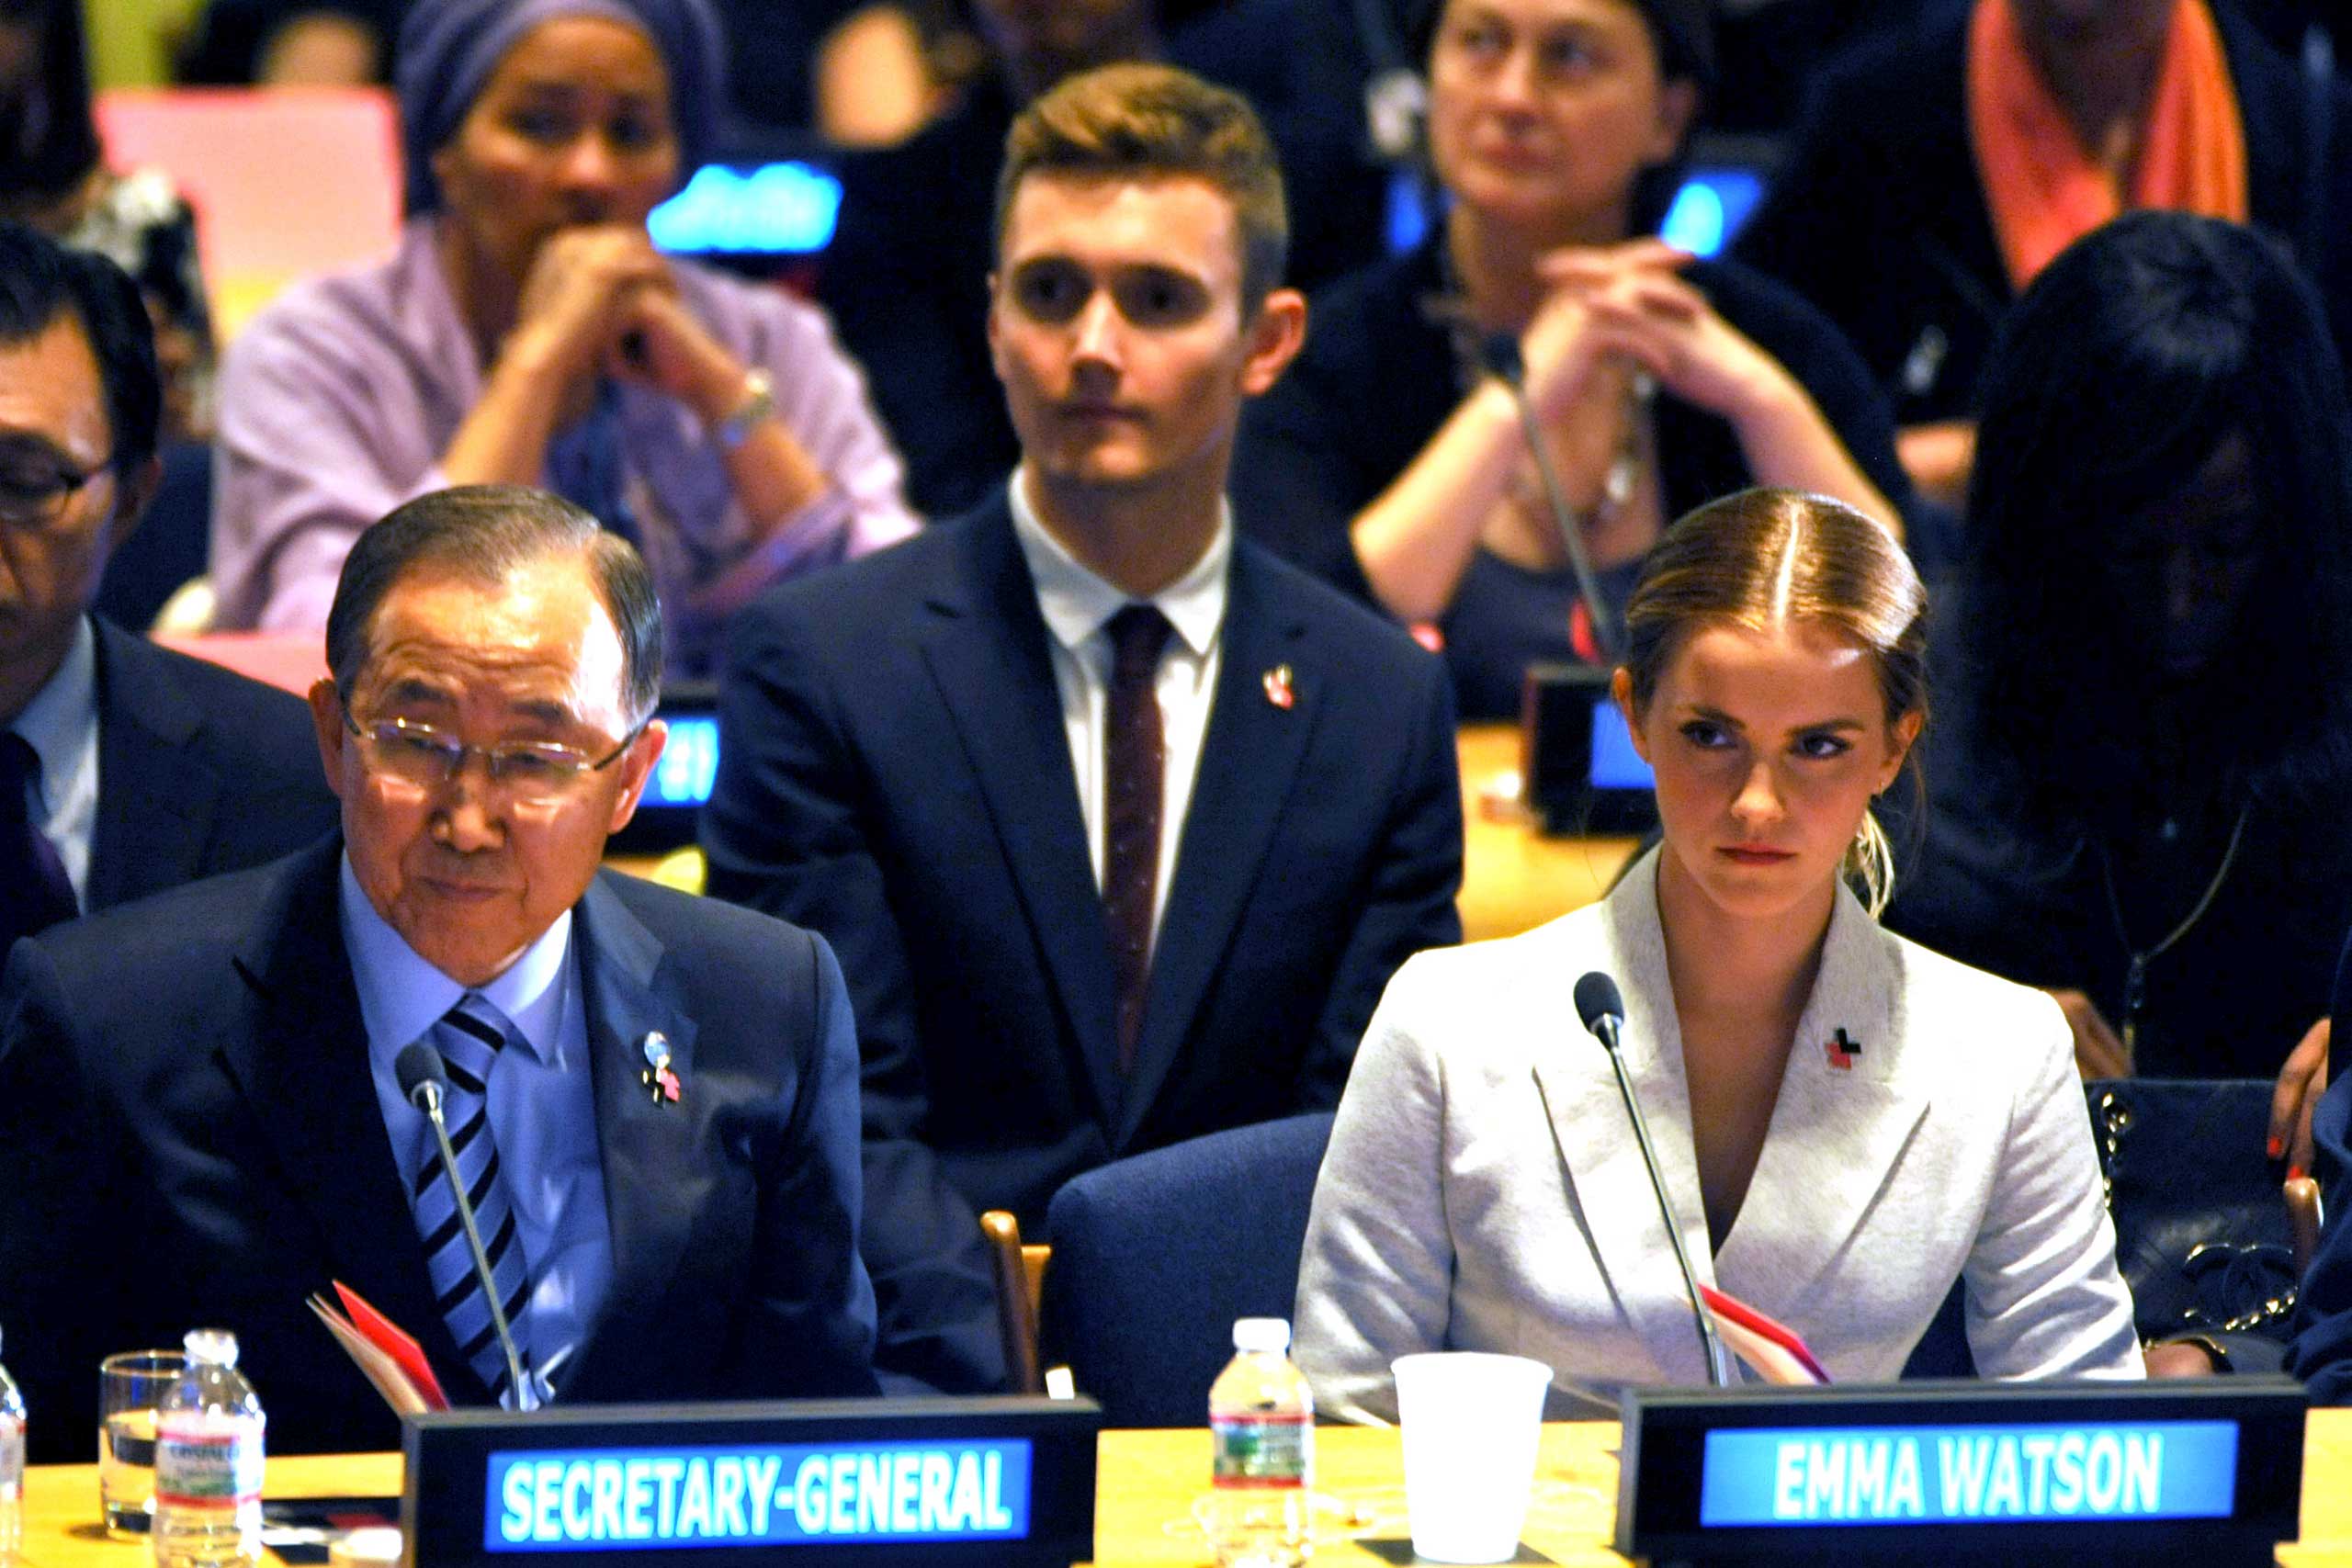 Emma Watson and Ban Ki-Moon attend the launch of the HeForShe Campaign at the United Nations in September of 2014 in New York. (Steve Sands—WireImage/Getty Images)